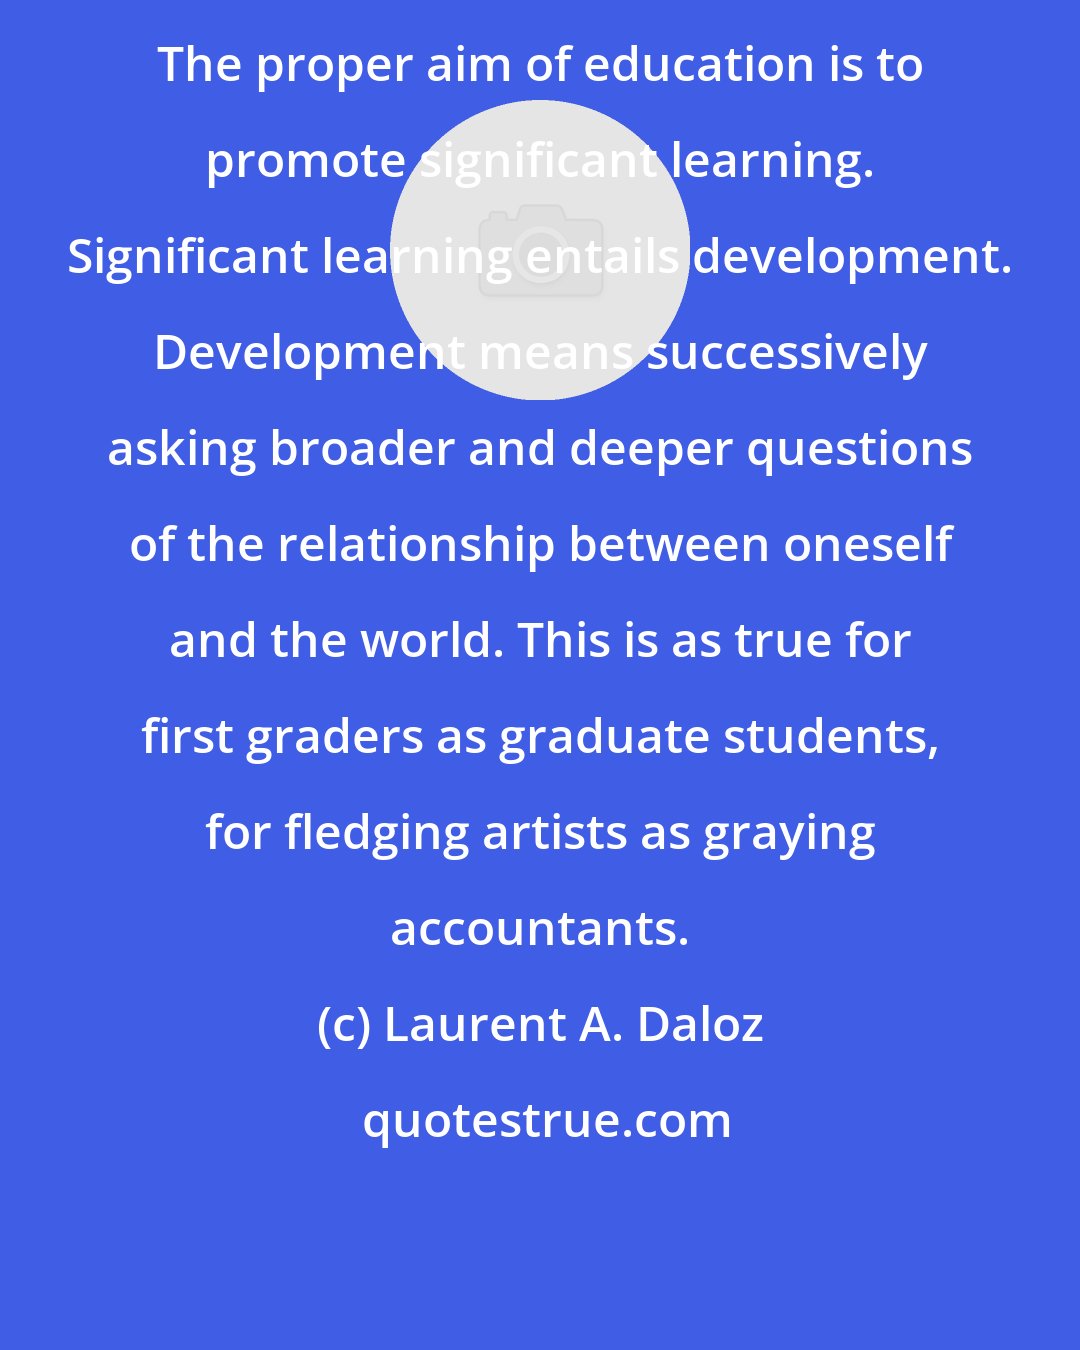 Laurent A. Daloz: The proper aim of education is to promote significant learning. Significant learning entails development. Development means successively asking broader and deeper questions of the relationship between oneself and the world. This is as true for first graders as graduate students, for fledging artists as graying accountants.